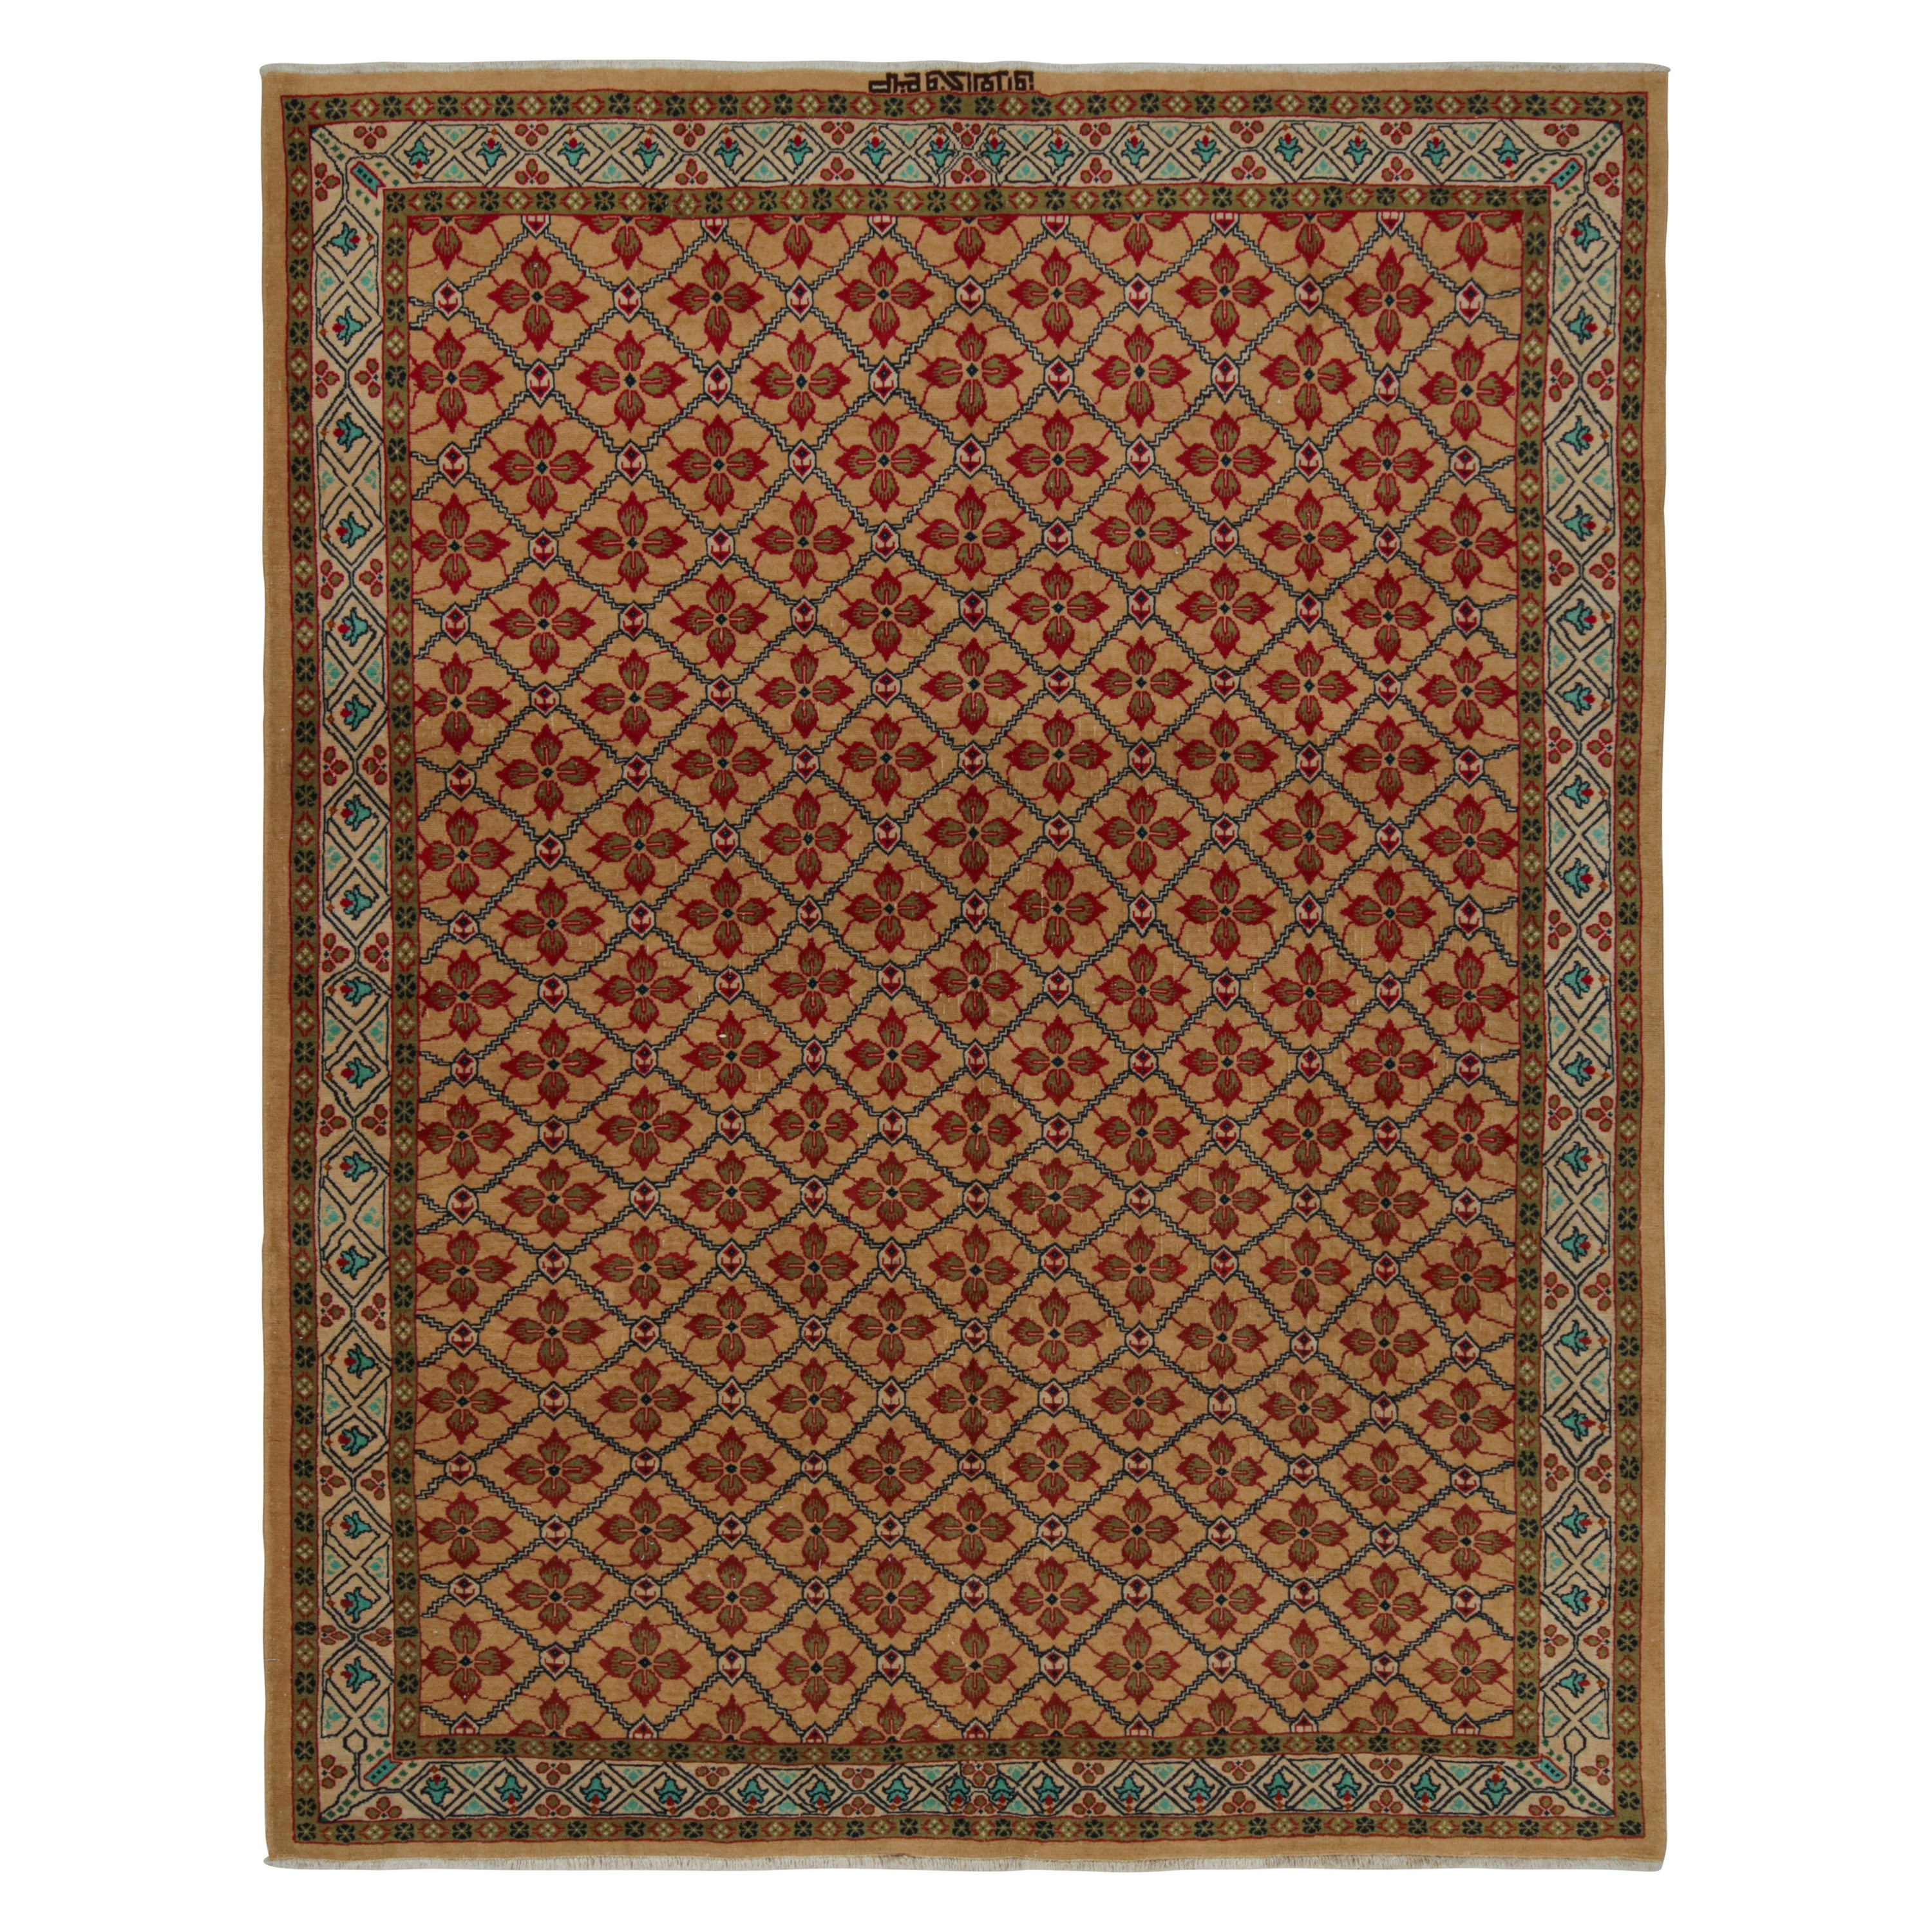 Vintage Turkish Rug, with All-Over Geometric Patterns, from Rug & Kilim